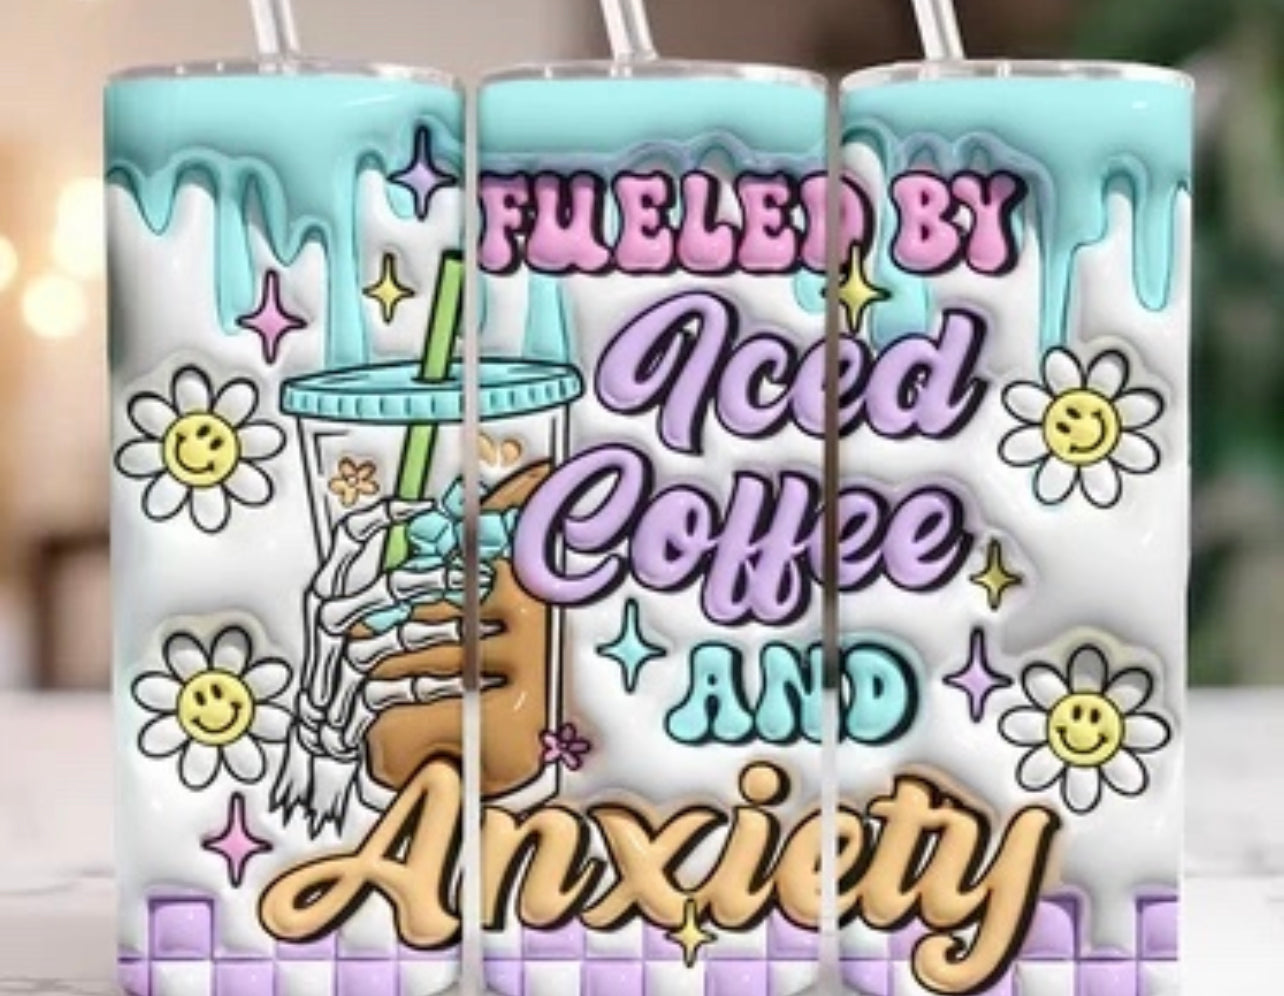 Field by iced coffee and anxiety Tumbler